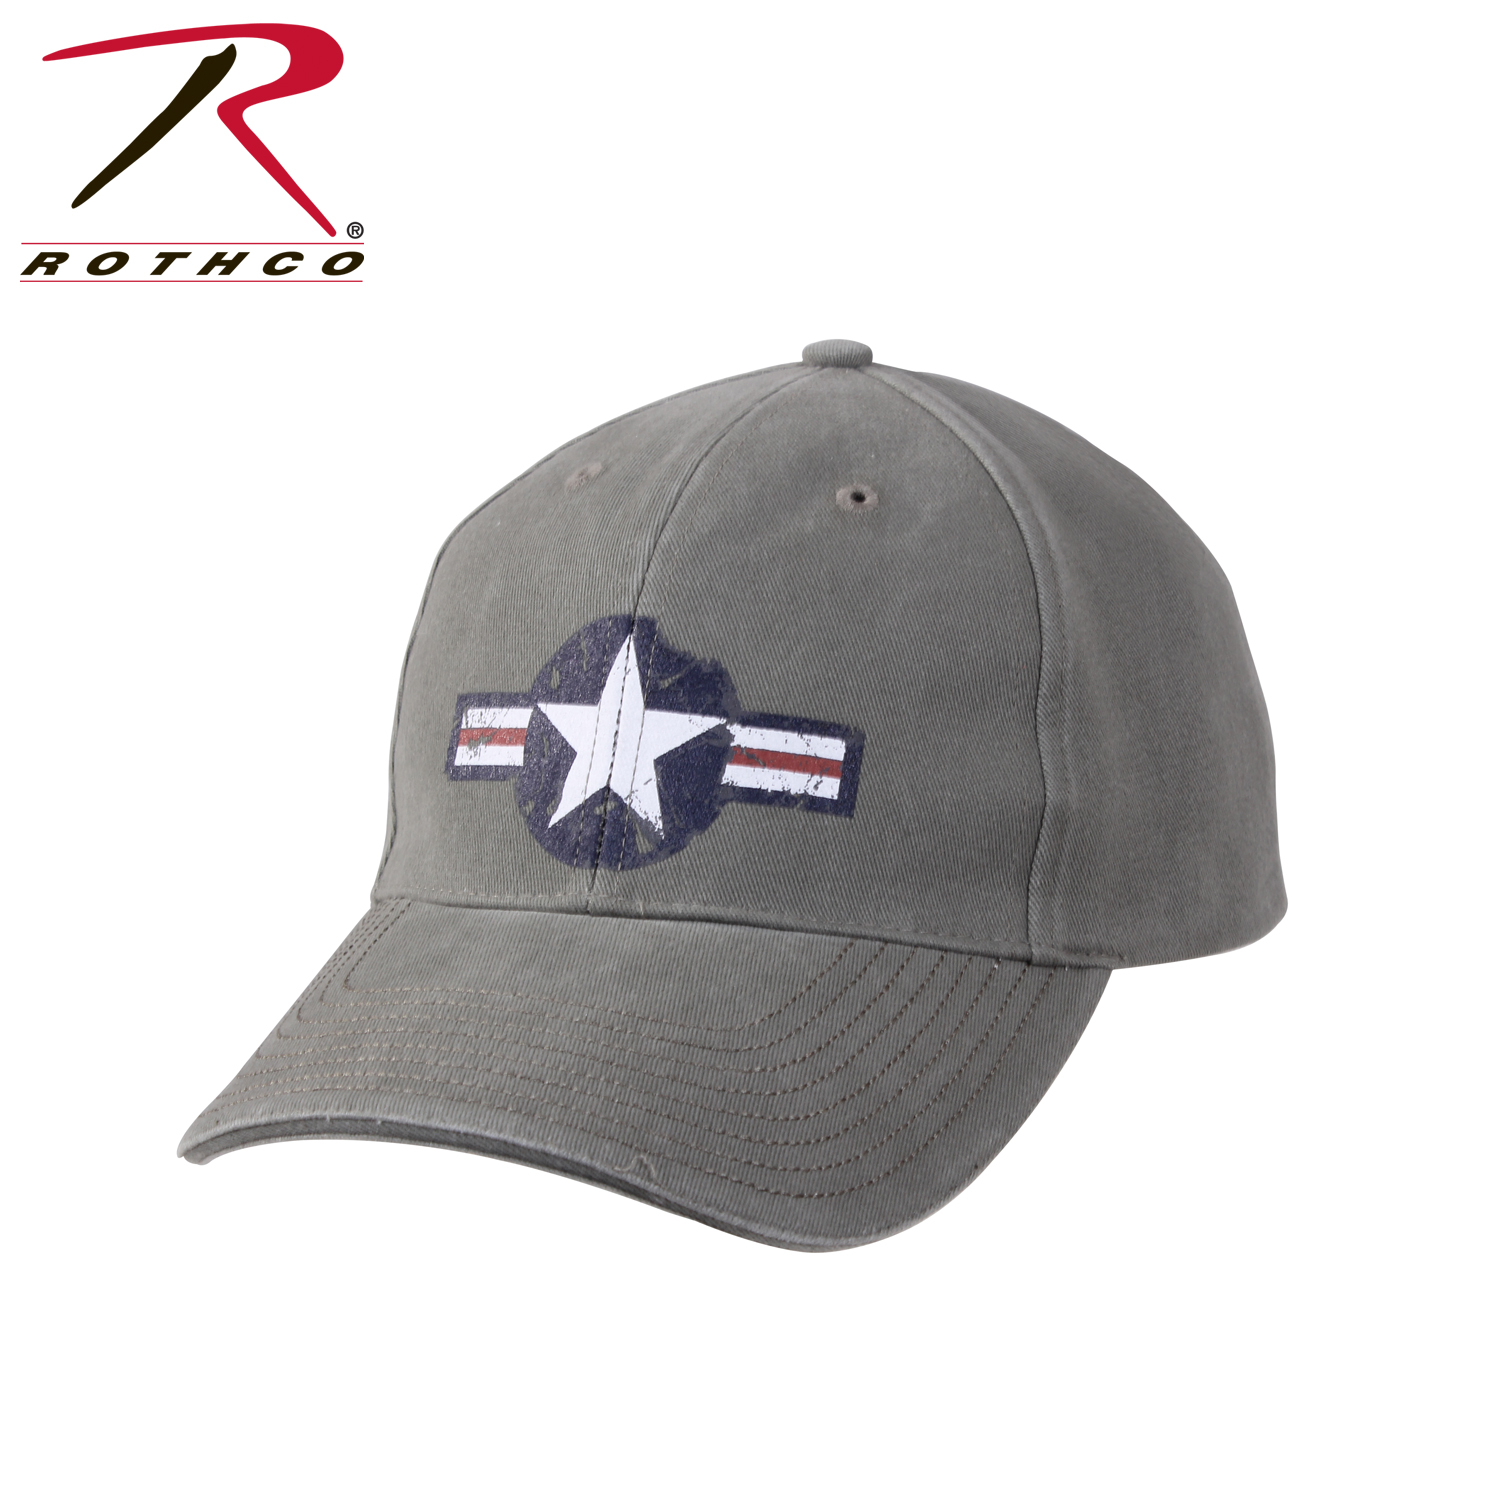 CASQUETTE U.S. DELUXE VINTAGE - ROTHCO - ARMY AIR